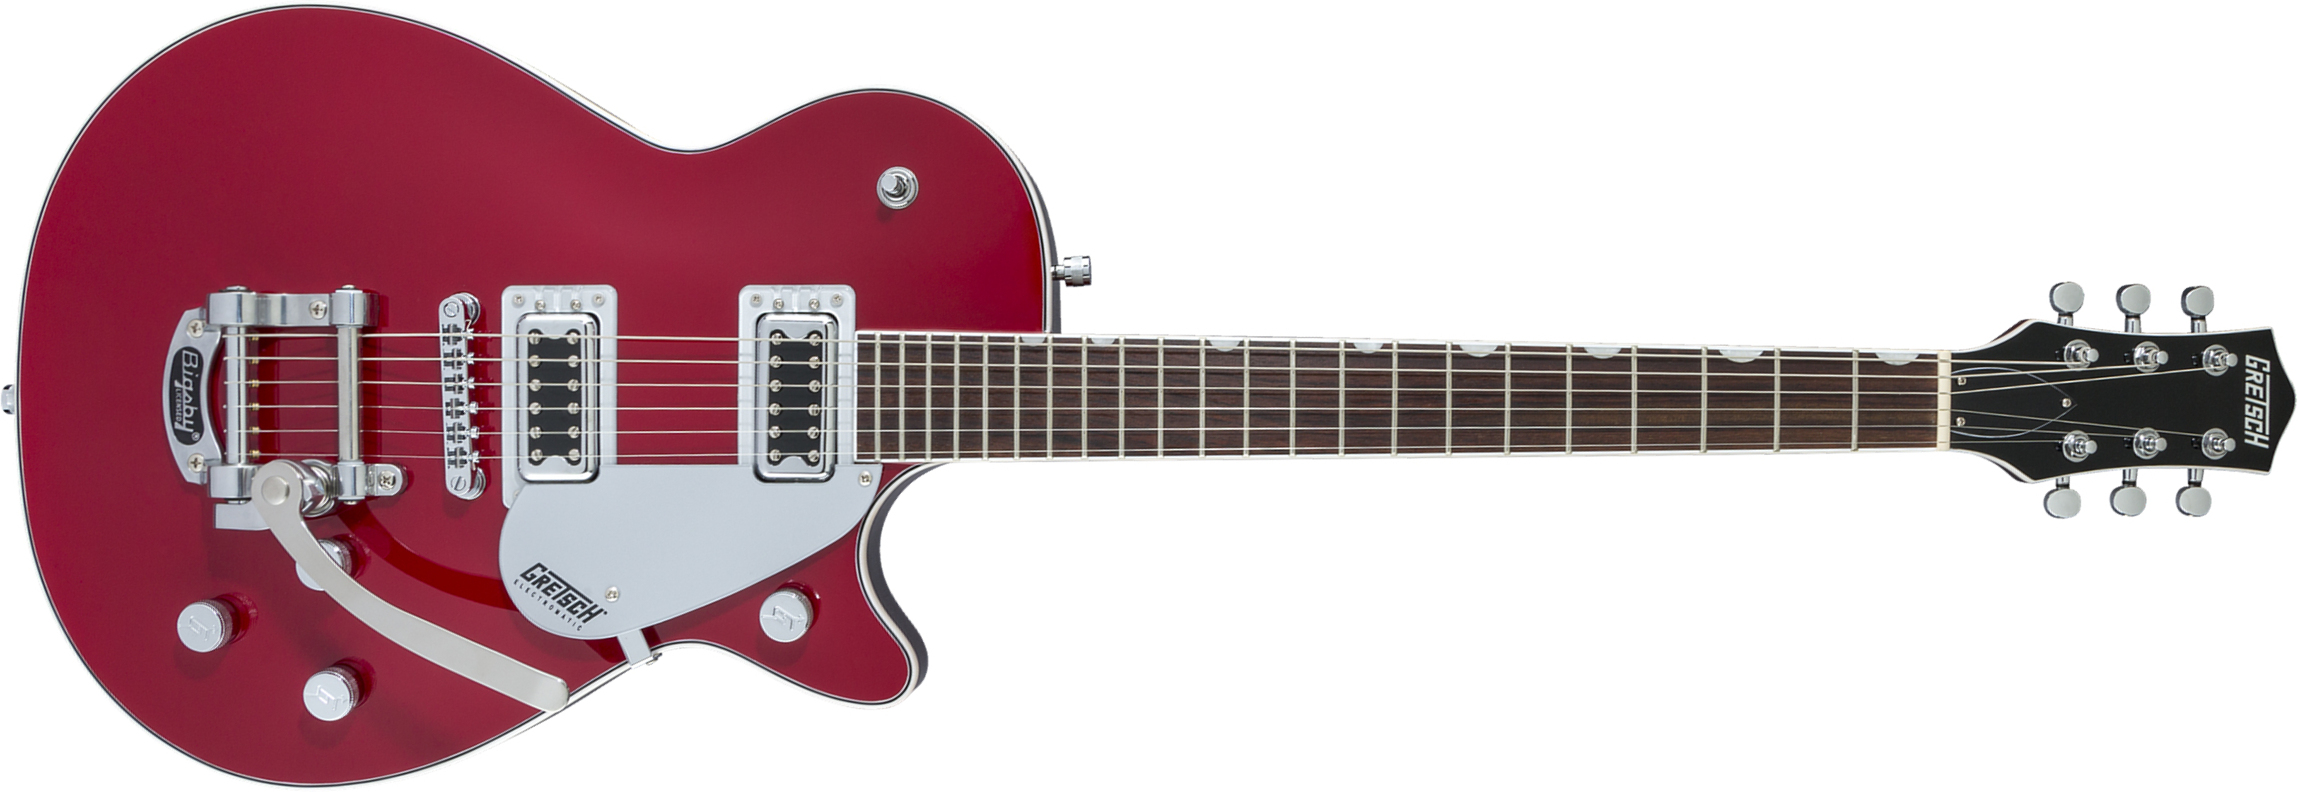 Gretsch G5230t Electromatic Jet Ft Single-cut Bigsby Hh Trem Wal - Firebird Red - Guitare Électrique Single Cut - Main picture